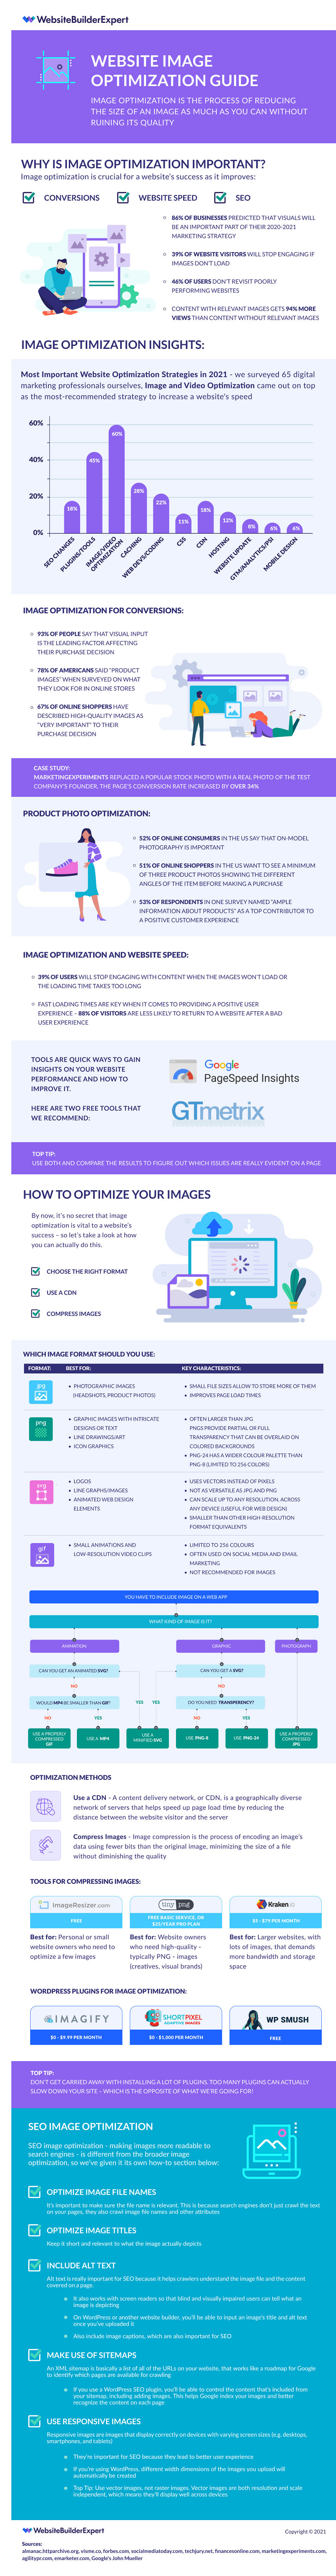 improve the performance of your website through image optimization infographic